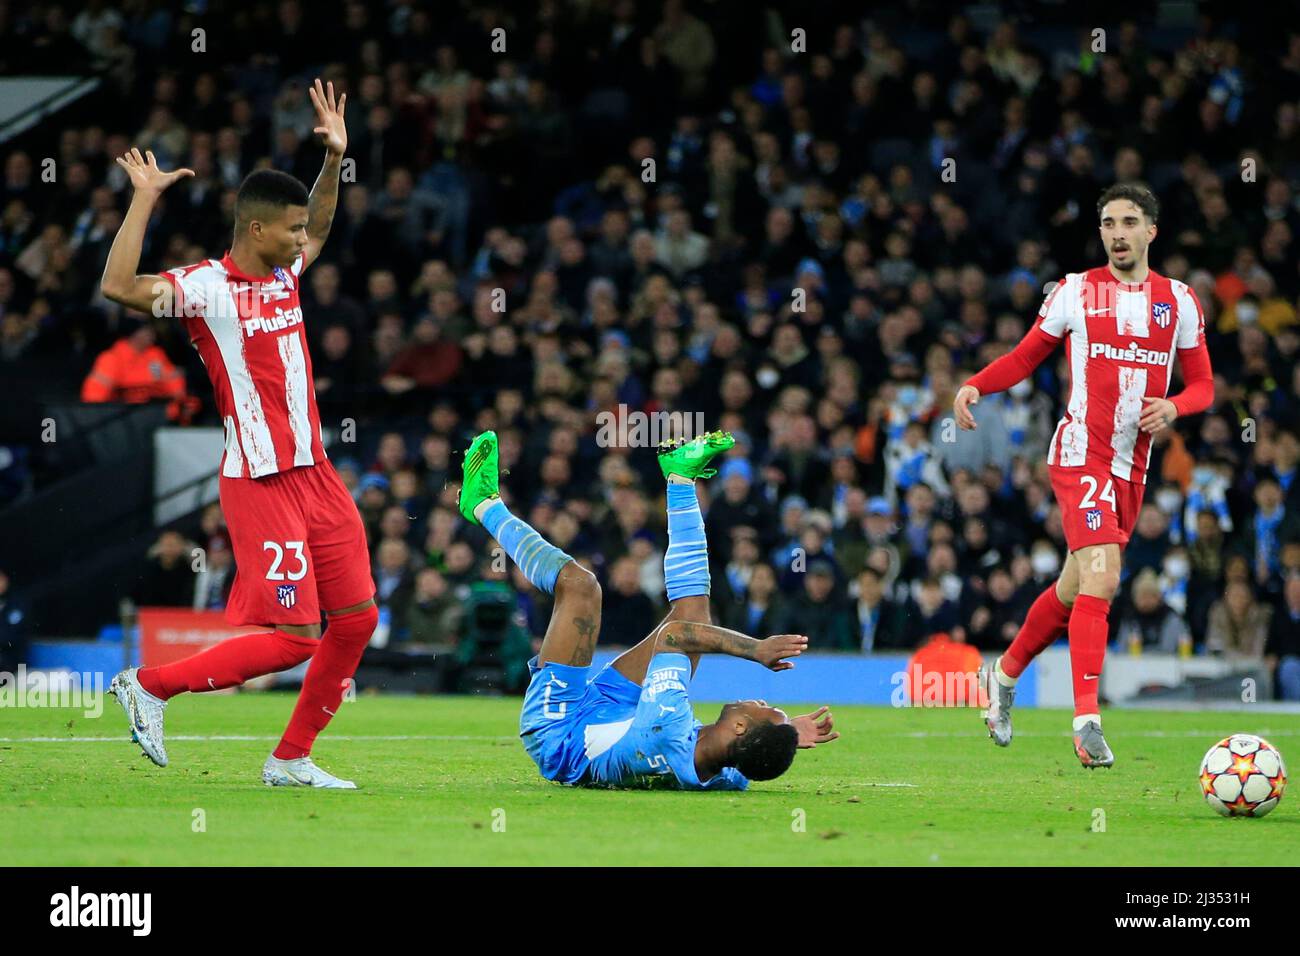 Manchester, UK. 05th Apr, 2022. Raheem Sterling #7 of Manchester City falls in the penalty area after a challenge by Reinildo Mandava #23 of Athletico Madrid but no penalty is given in Manchester, United Kingdom on 4/5/2022. (Photo by Conor Molloy/News Images/Sipa USA) Credit: Sipa USA/Alamy Live News Stock Photo